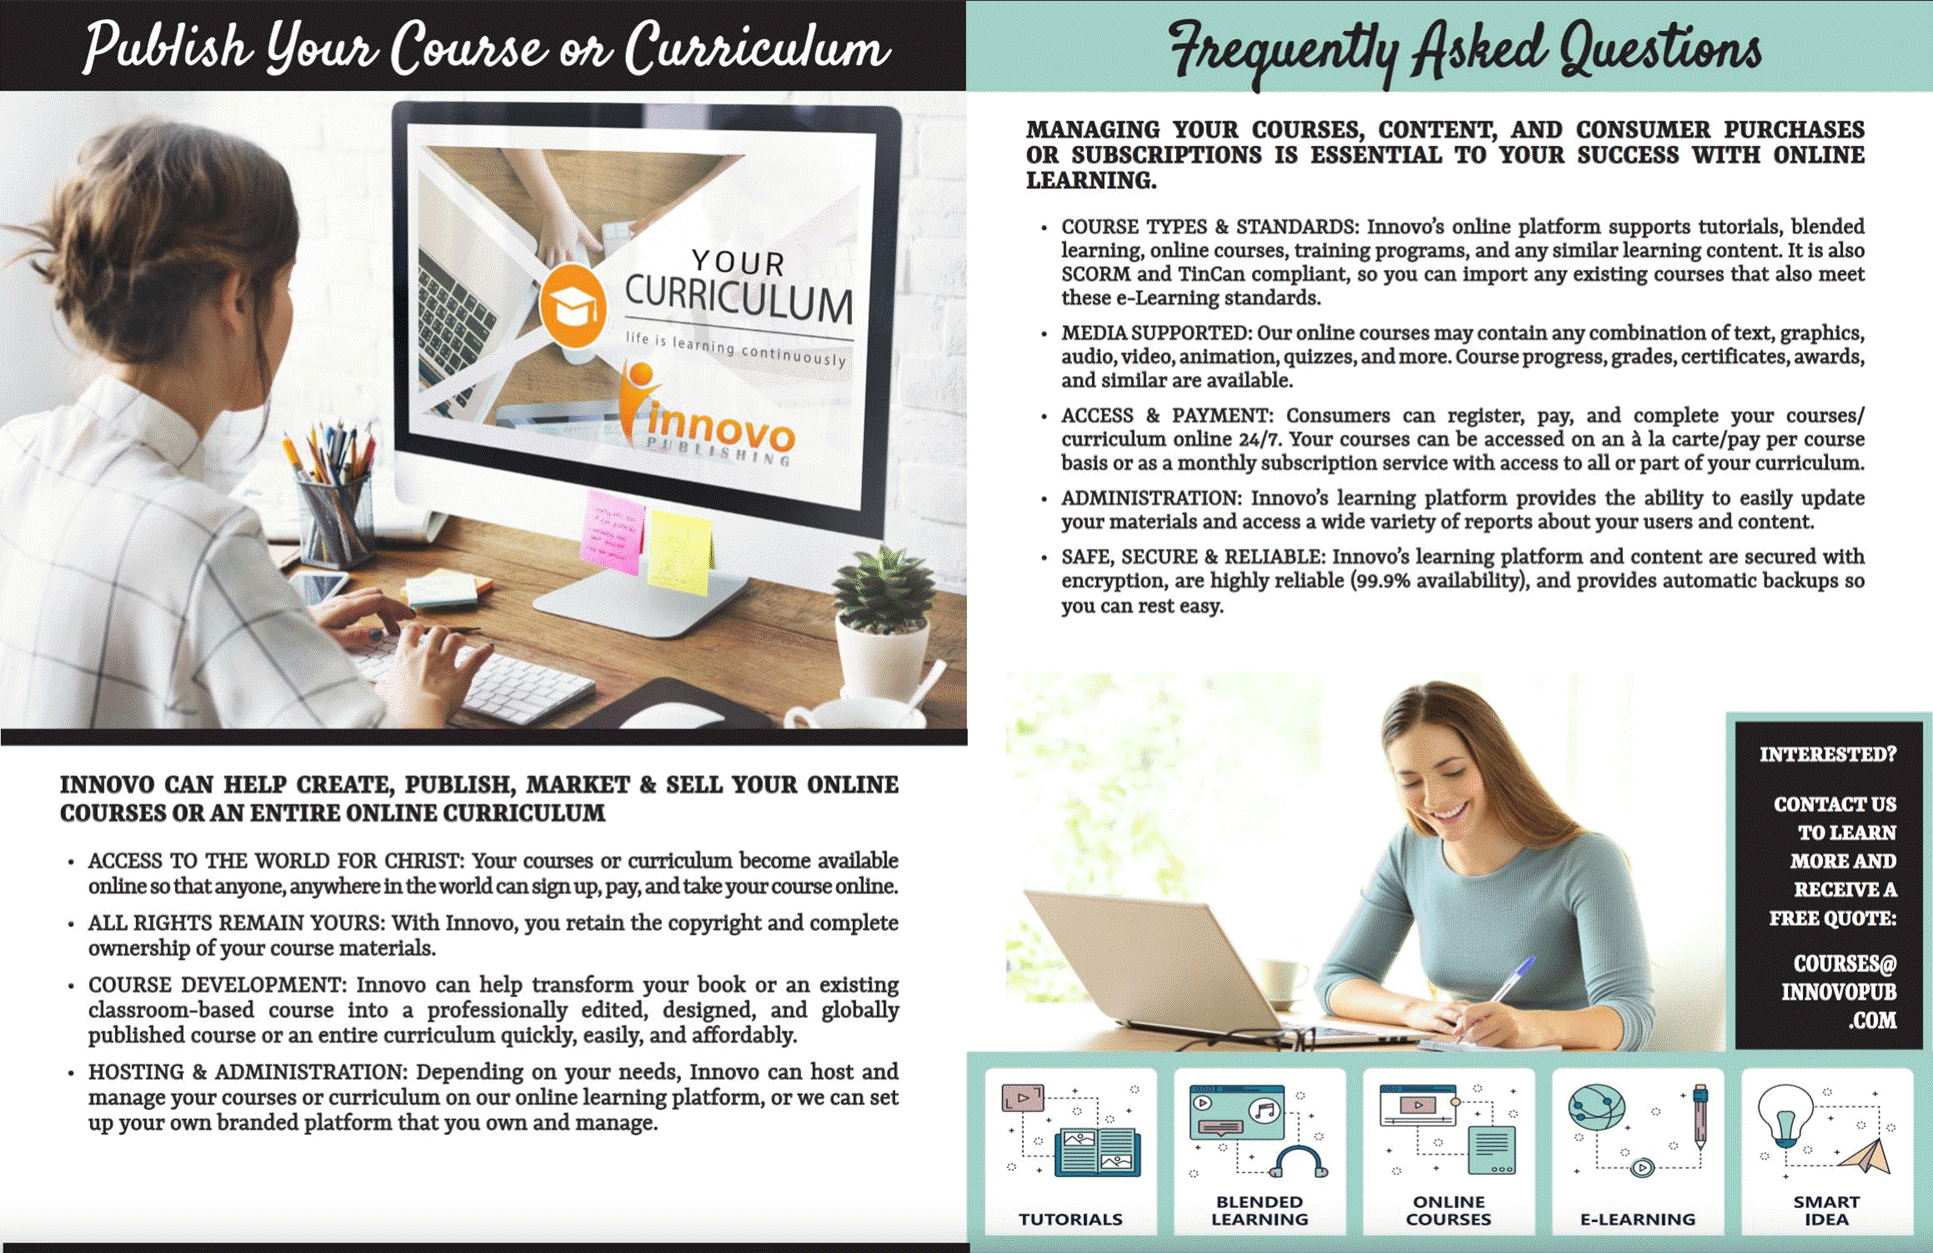 Innovo Course and Curricula Publishing for Christian Authors, Artists, and Ministries